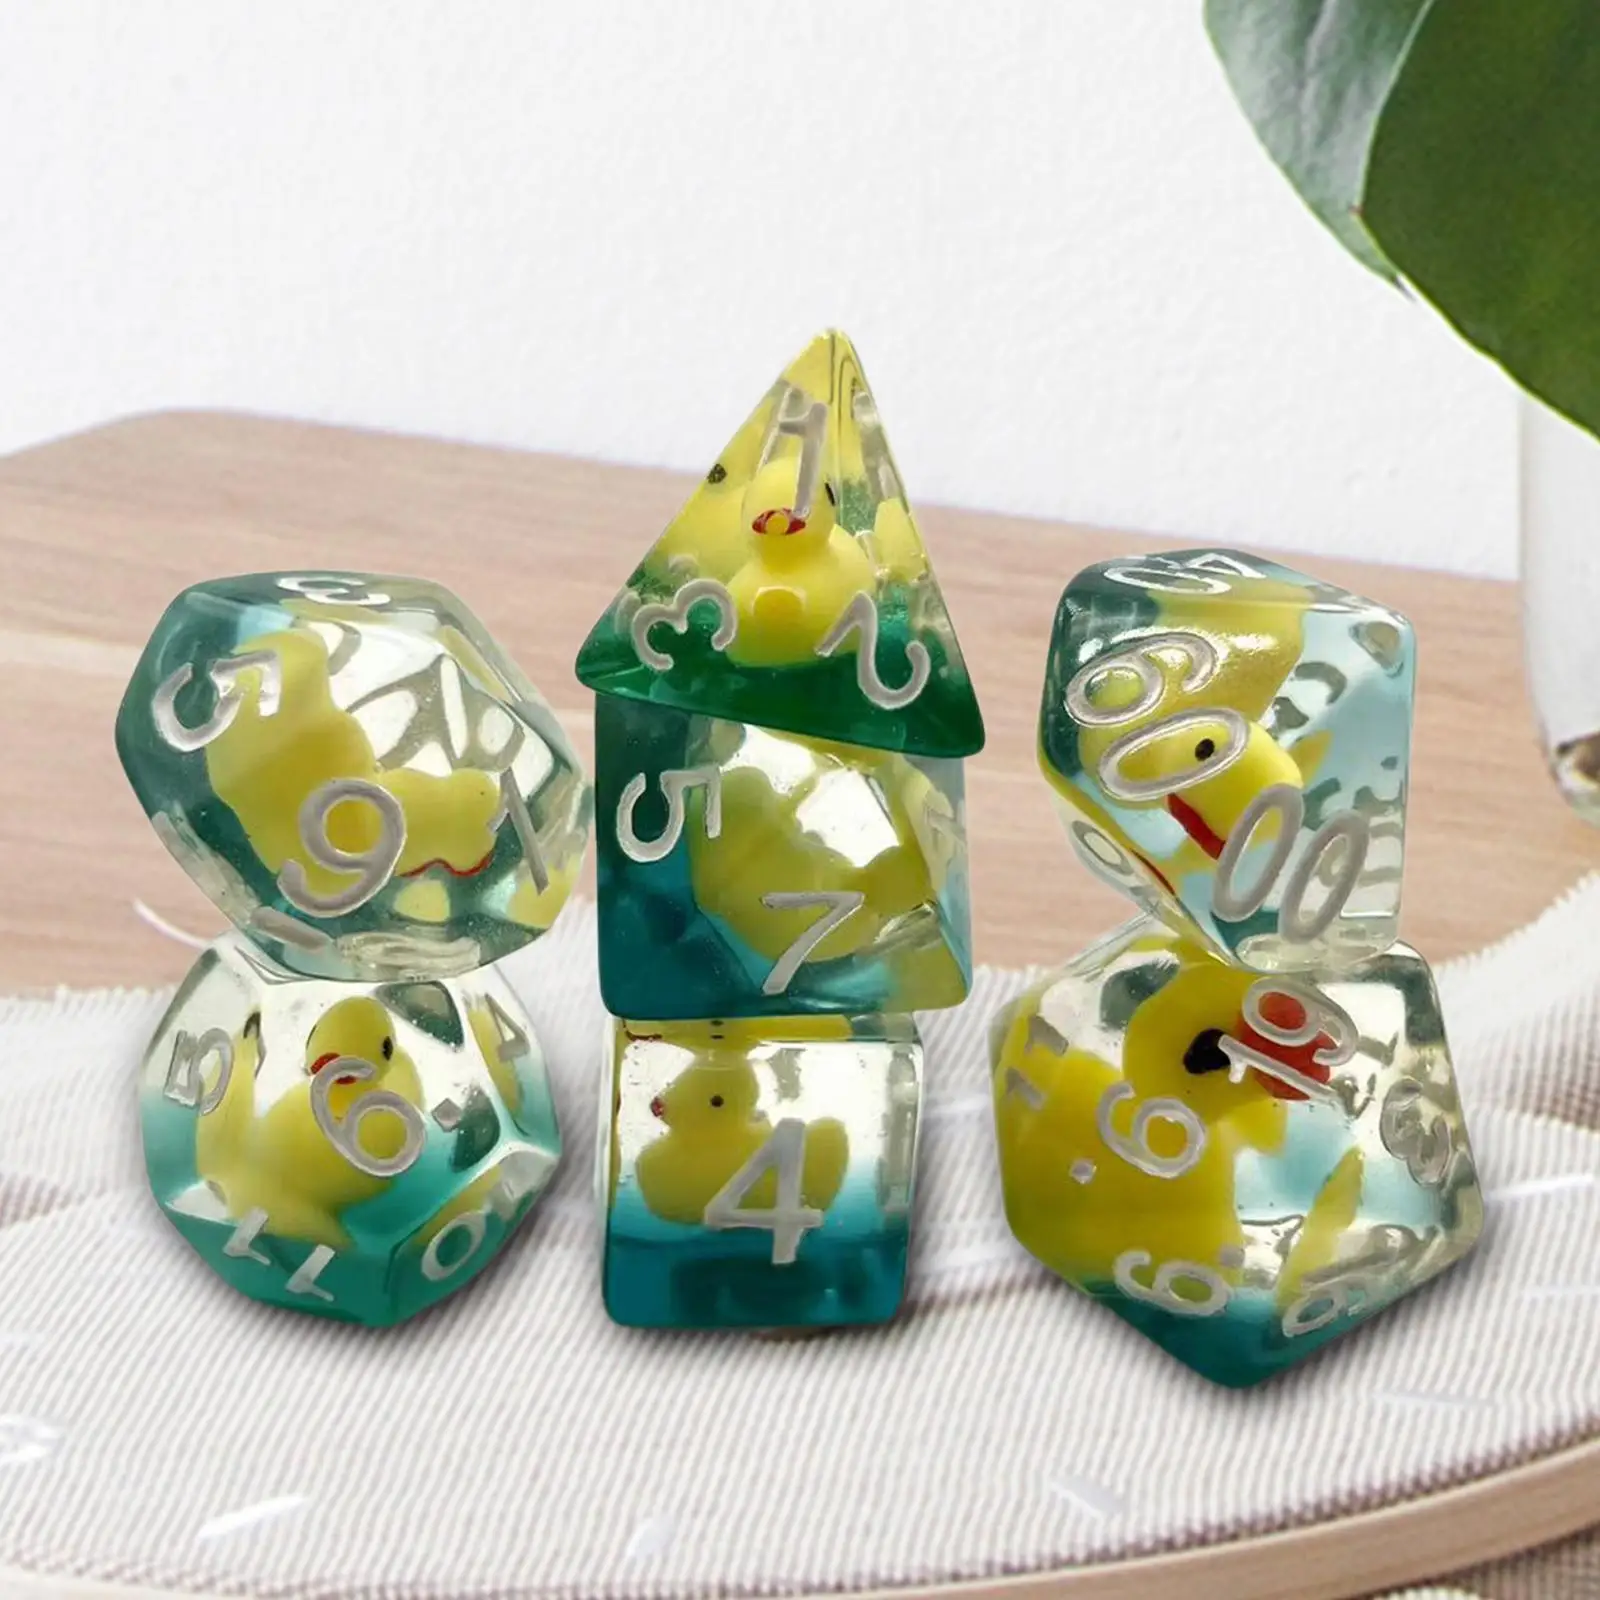 7Pcs Multi Sided Polyhedral Dices Set D4 D8 D10 D12 D20 Party Toys for MTG Role Playing RPG Board Game Classroom Accessories